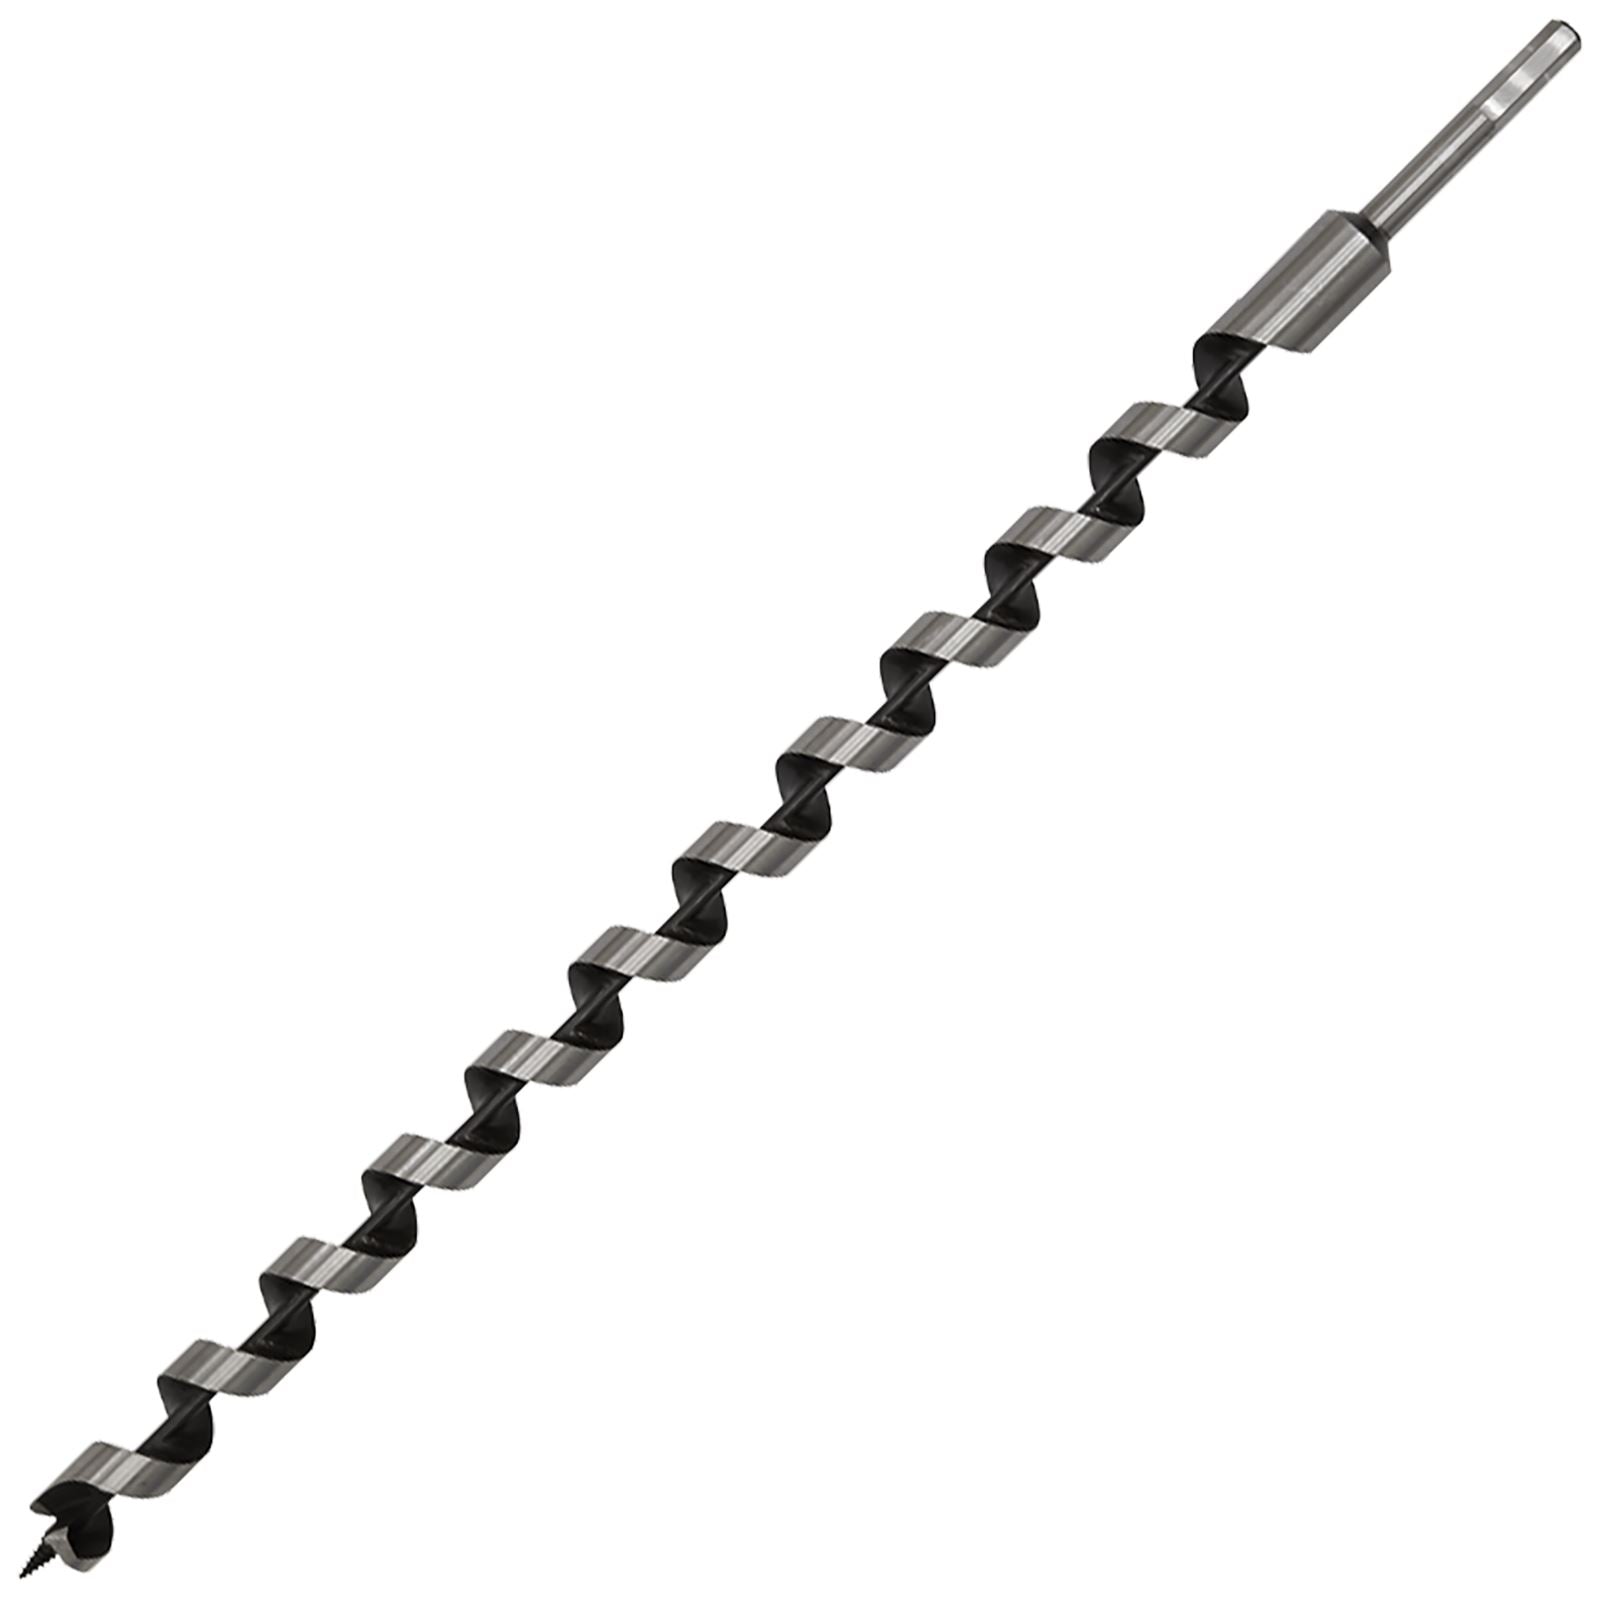 Worksafe by Sealey Auger Wood Drill Bit 25mm x 600mm